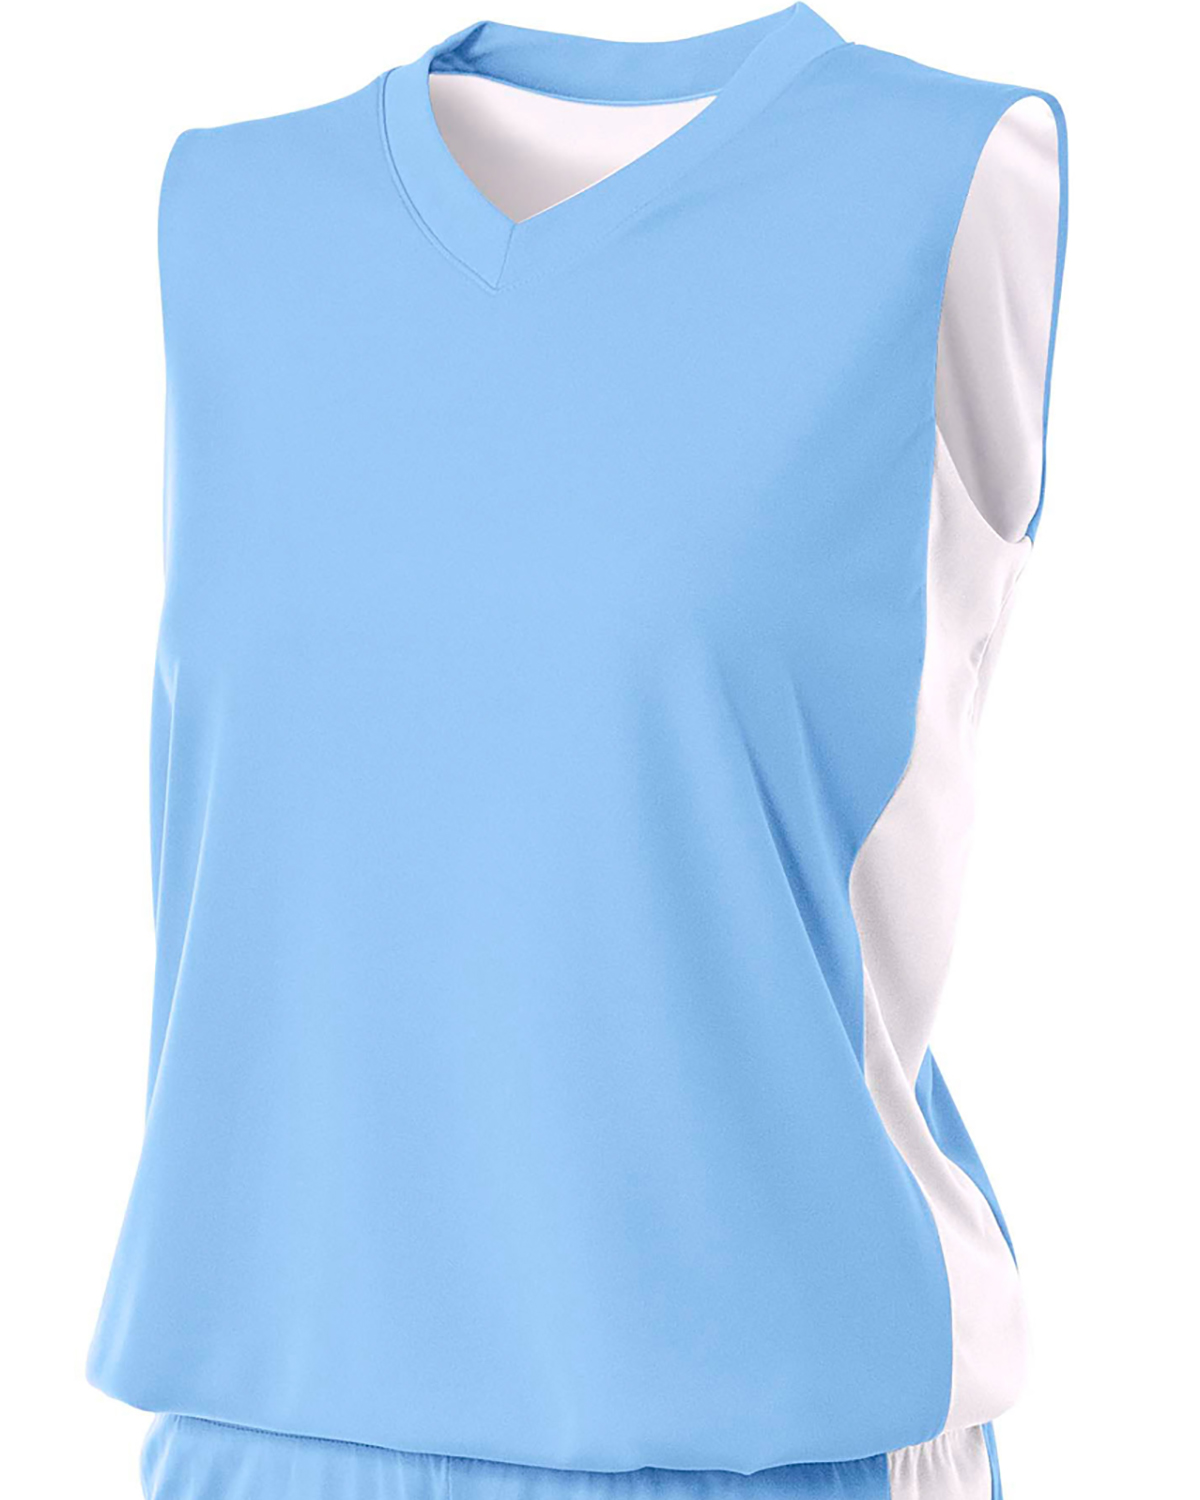 NW2320 A4 Ladies' Reversible Moisture Management Muscle Shirt